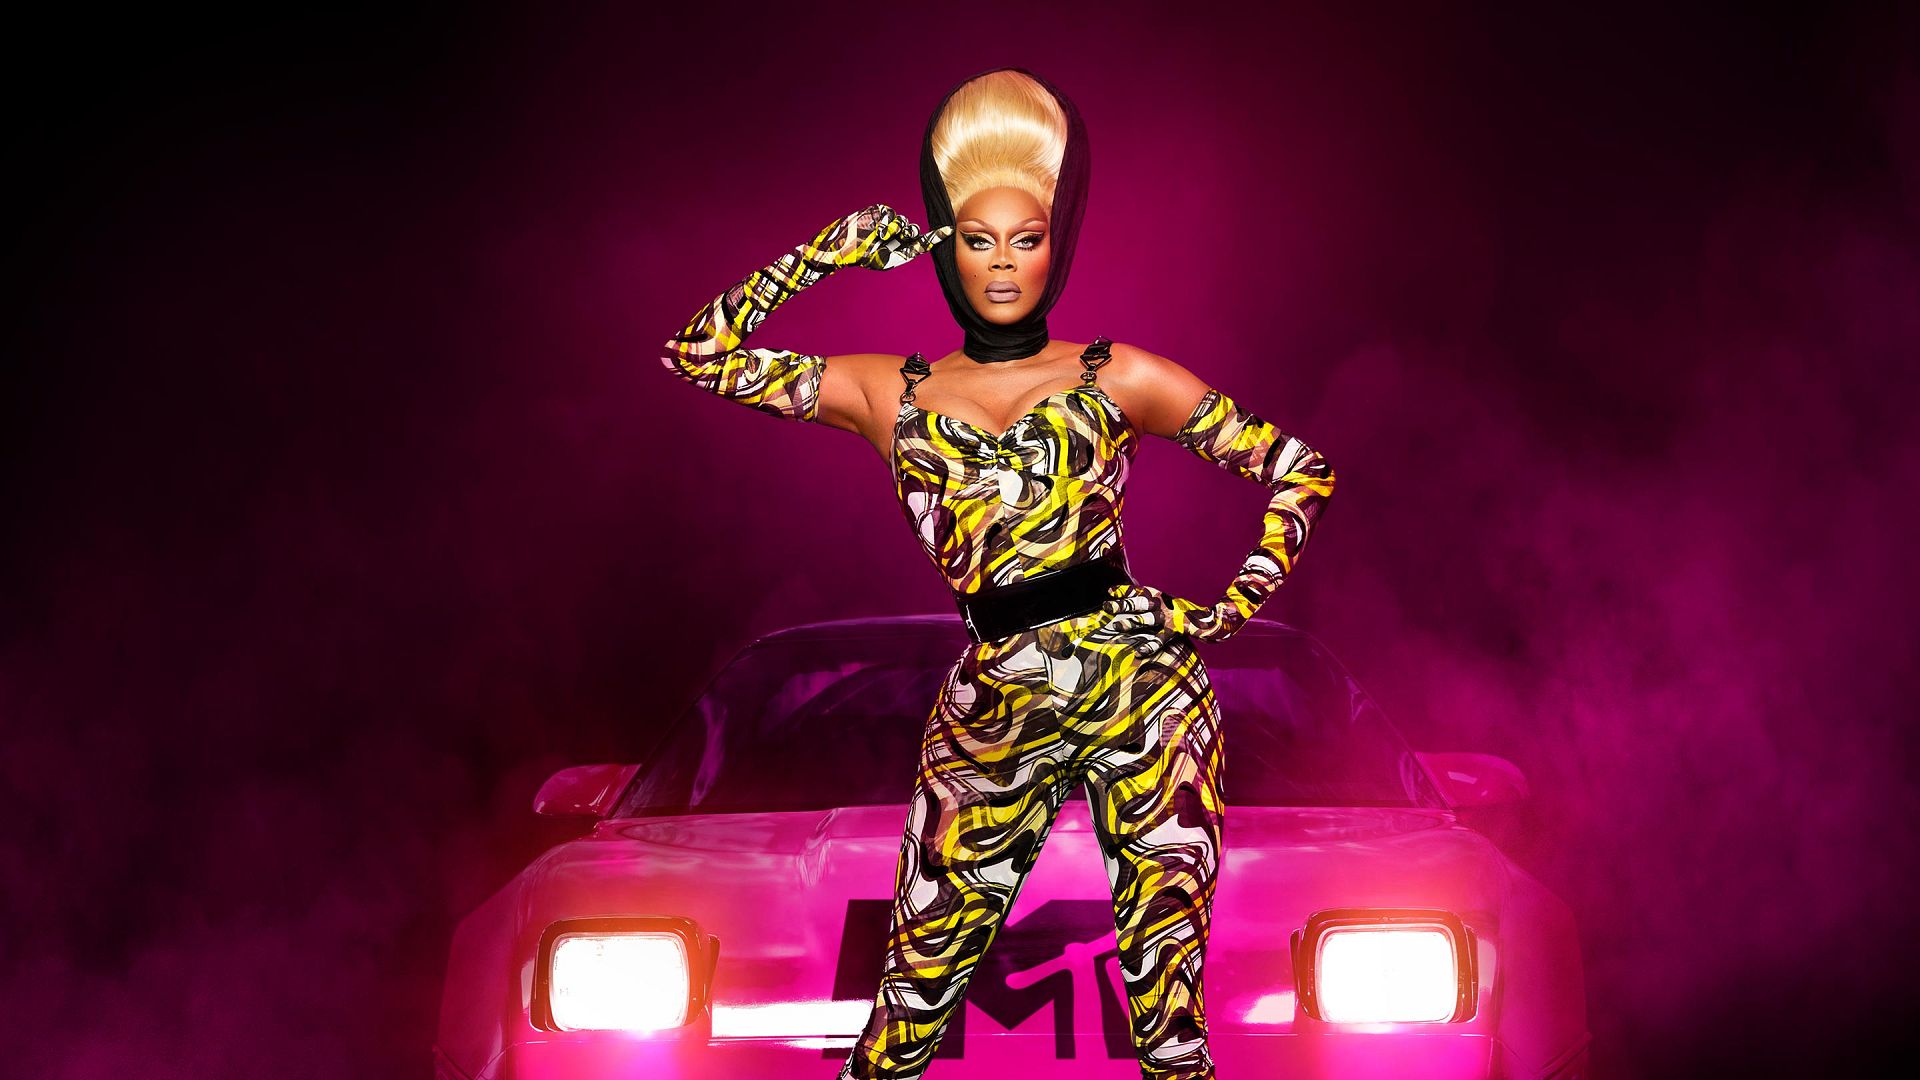 Drag Race Brasil: Here are the 12 queens competing on season 1